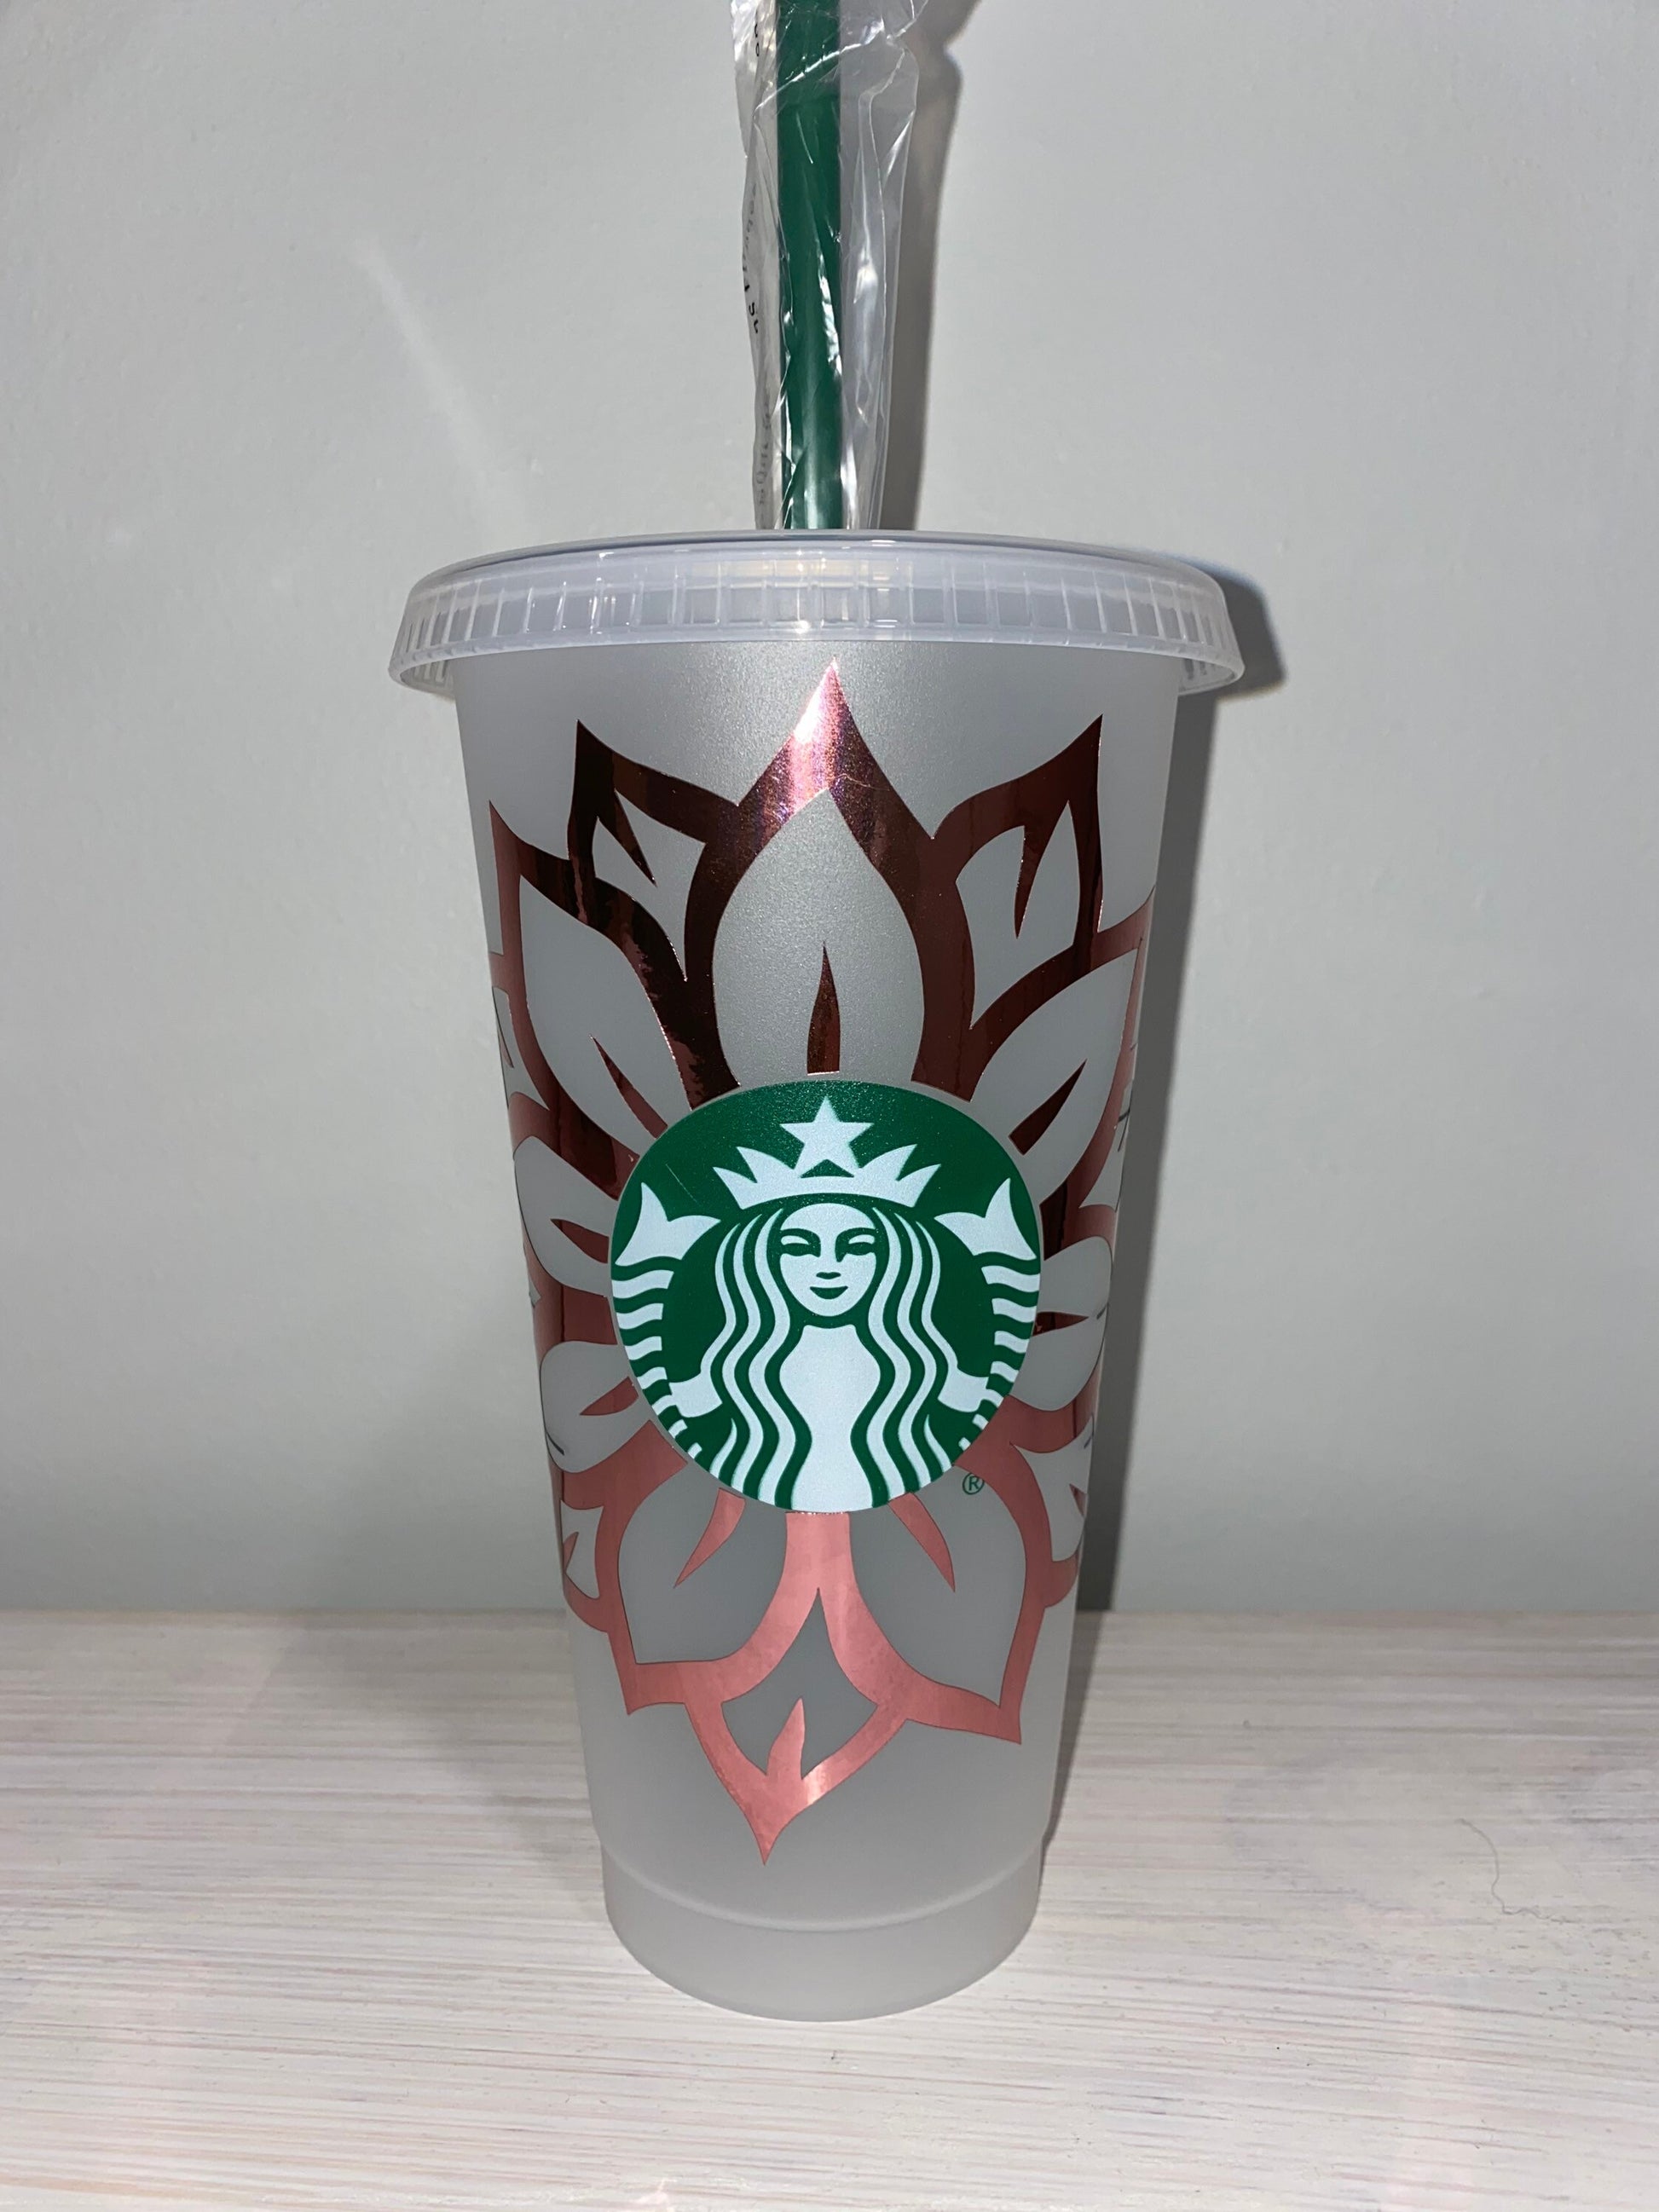 Sunflower Personalized Starbucks Cup / Coffee Cup / Gift Ideas 